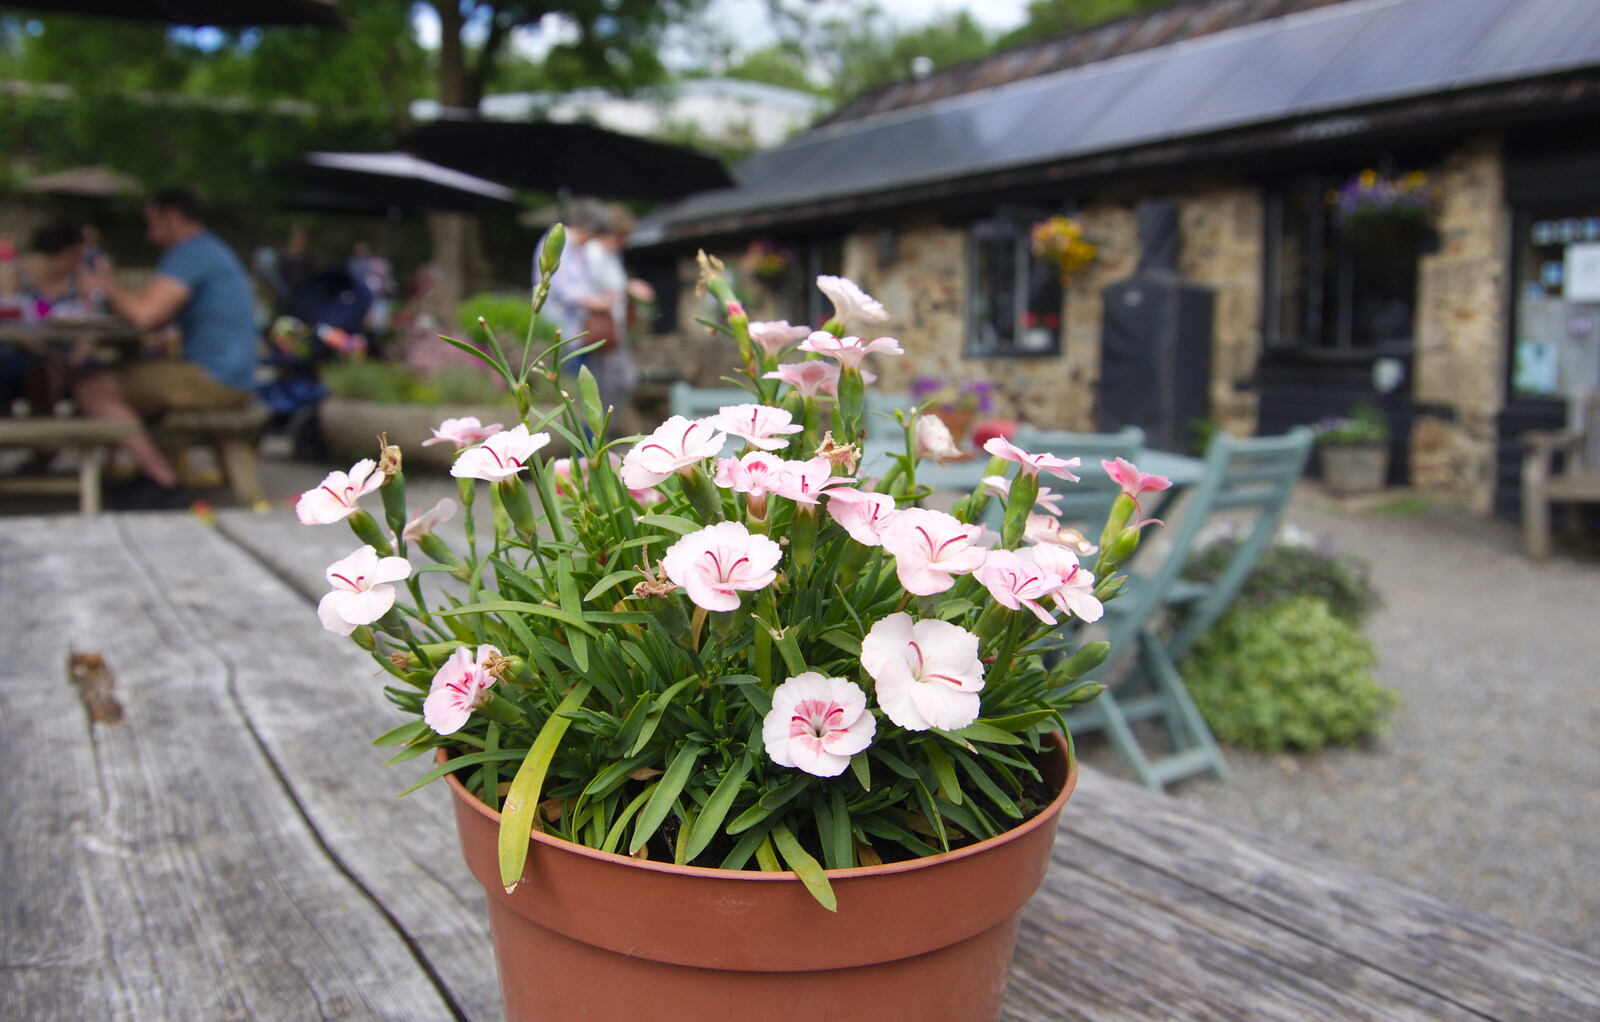 A nice pot of flowers from Chagford Lido and a Trip to Parke, Bovey Tracey, Devon - 25th May 2019